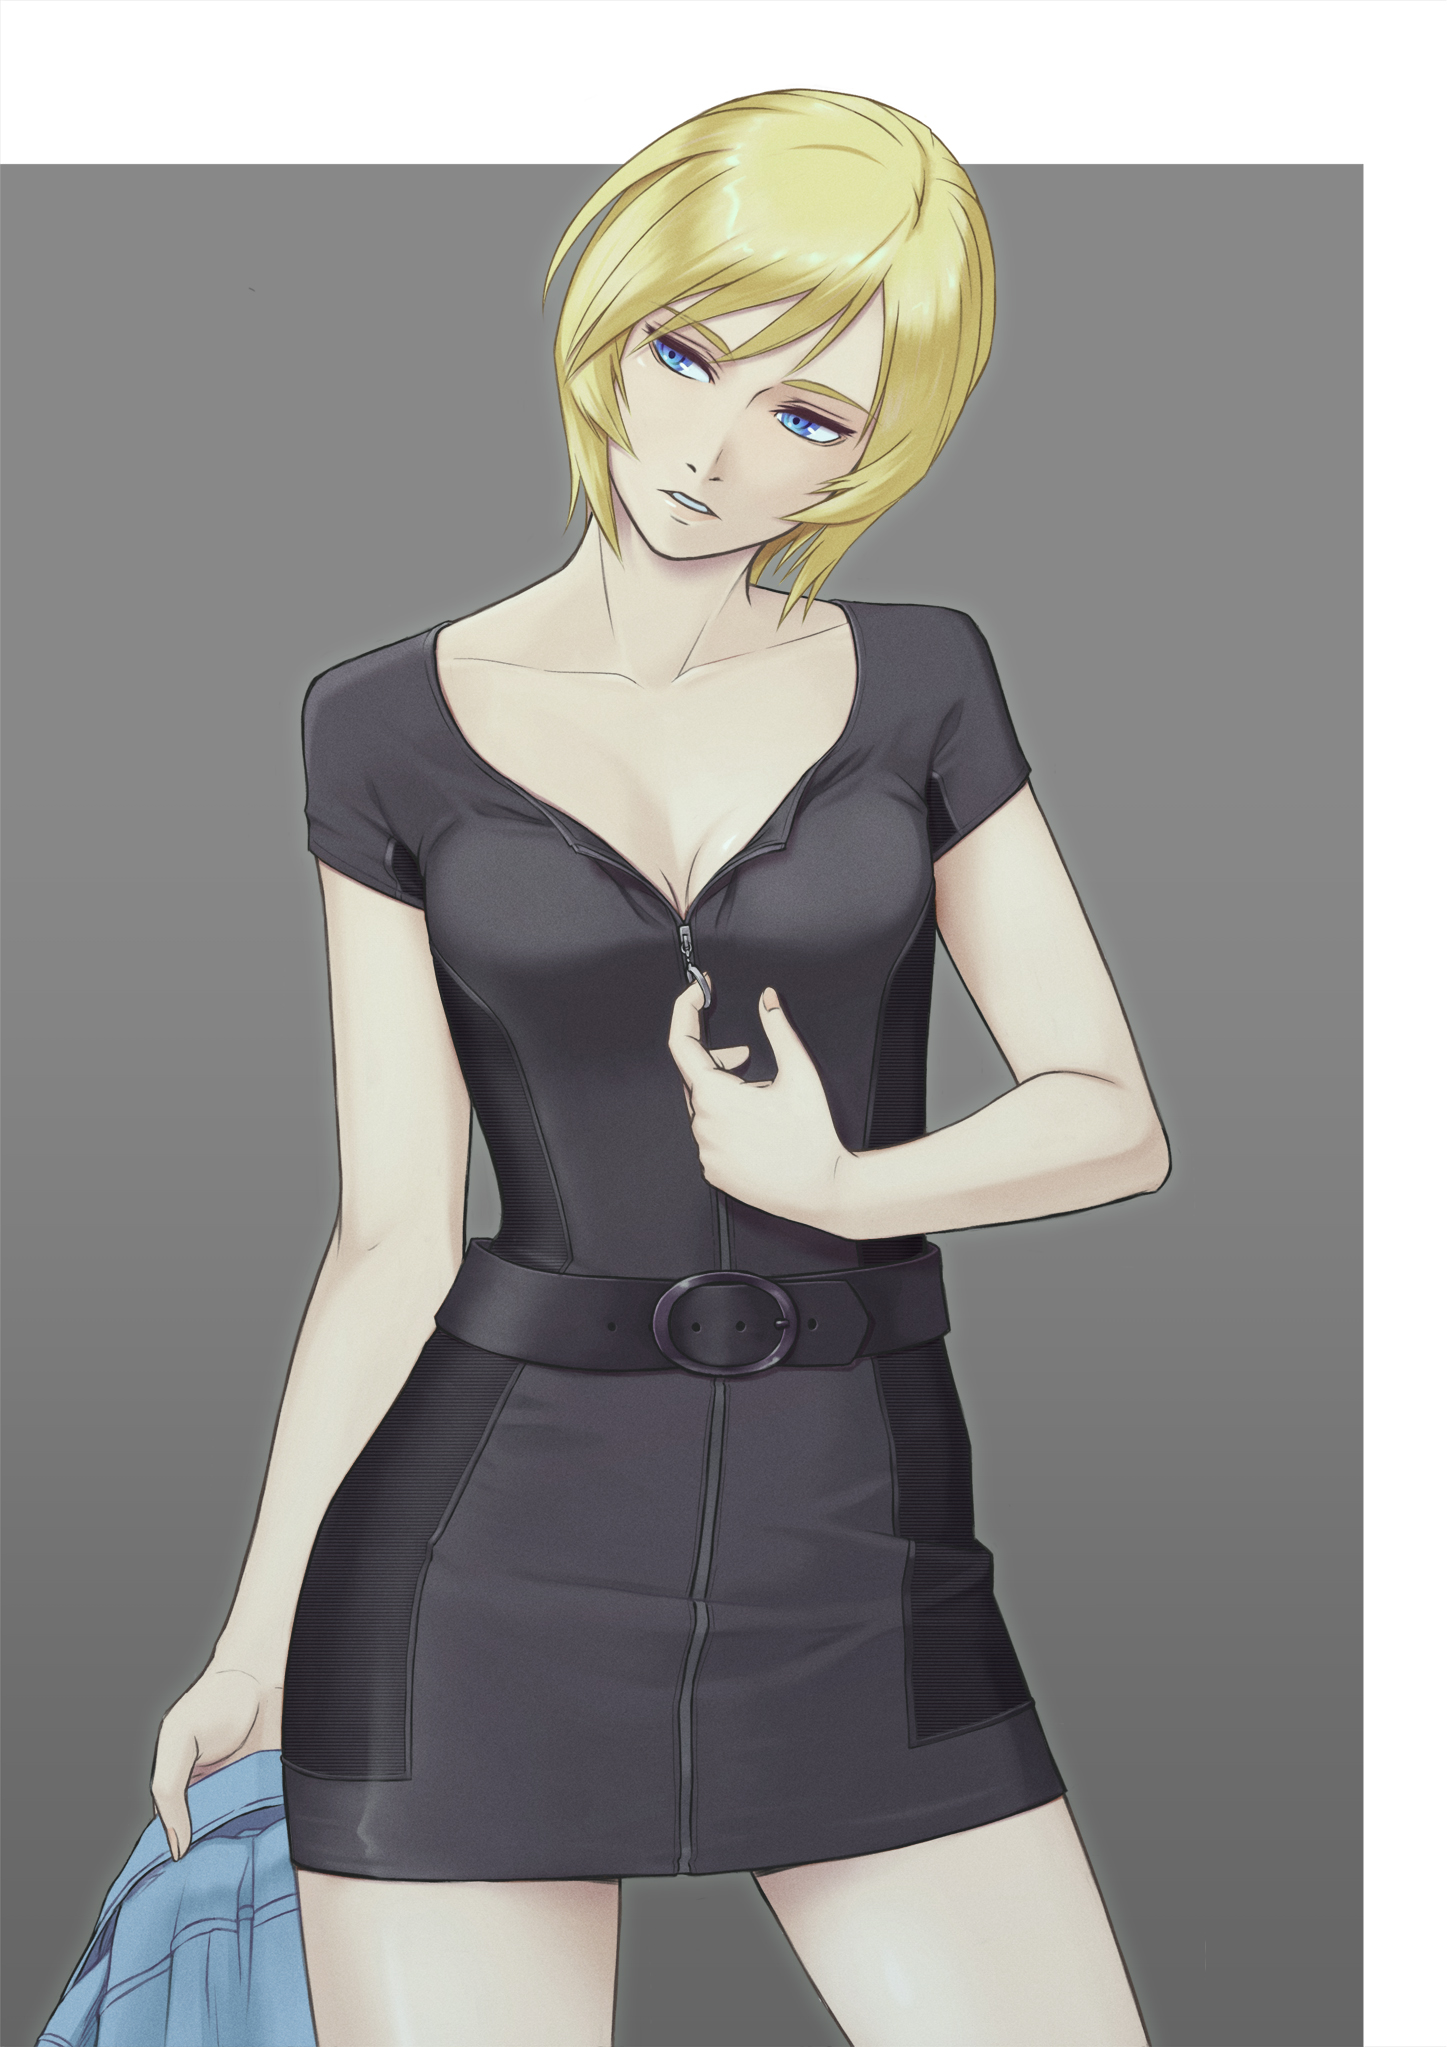 Parasite Eve Aya Brea Cleavage Dress Tagme Undressing 1023319 Yande Re